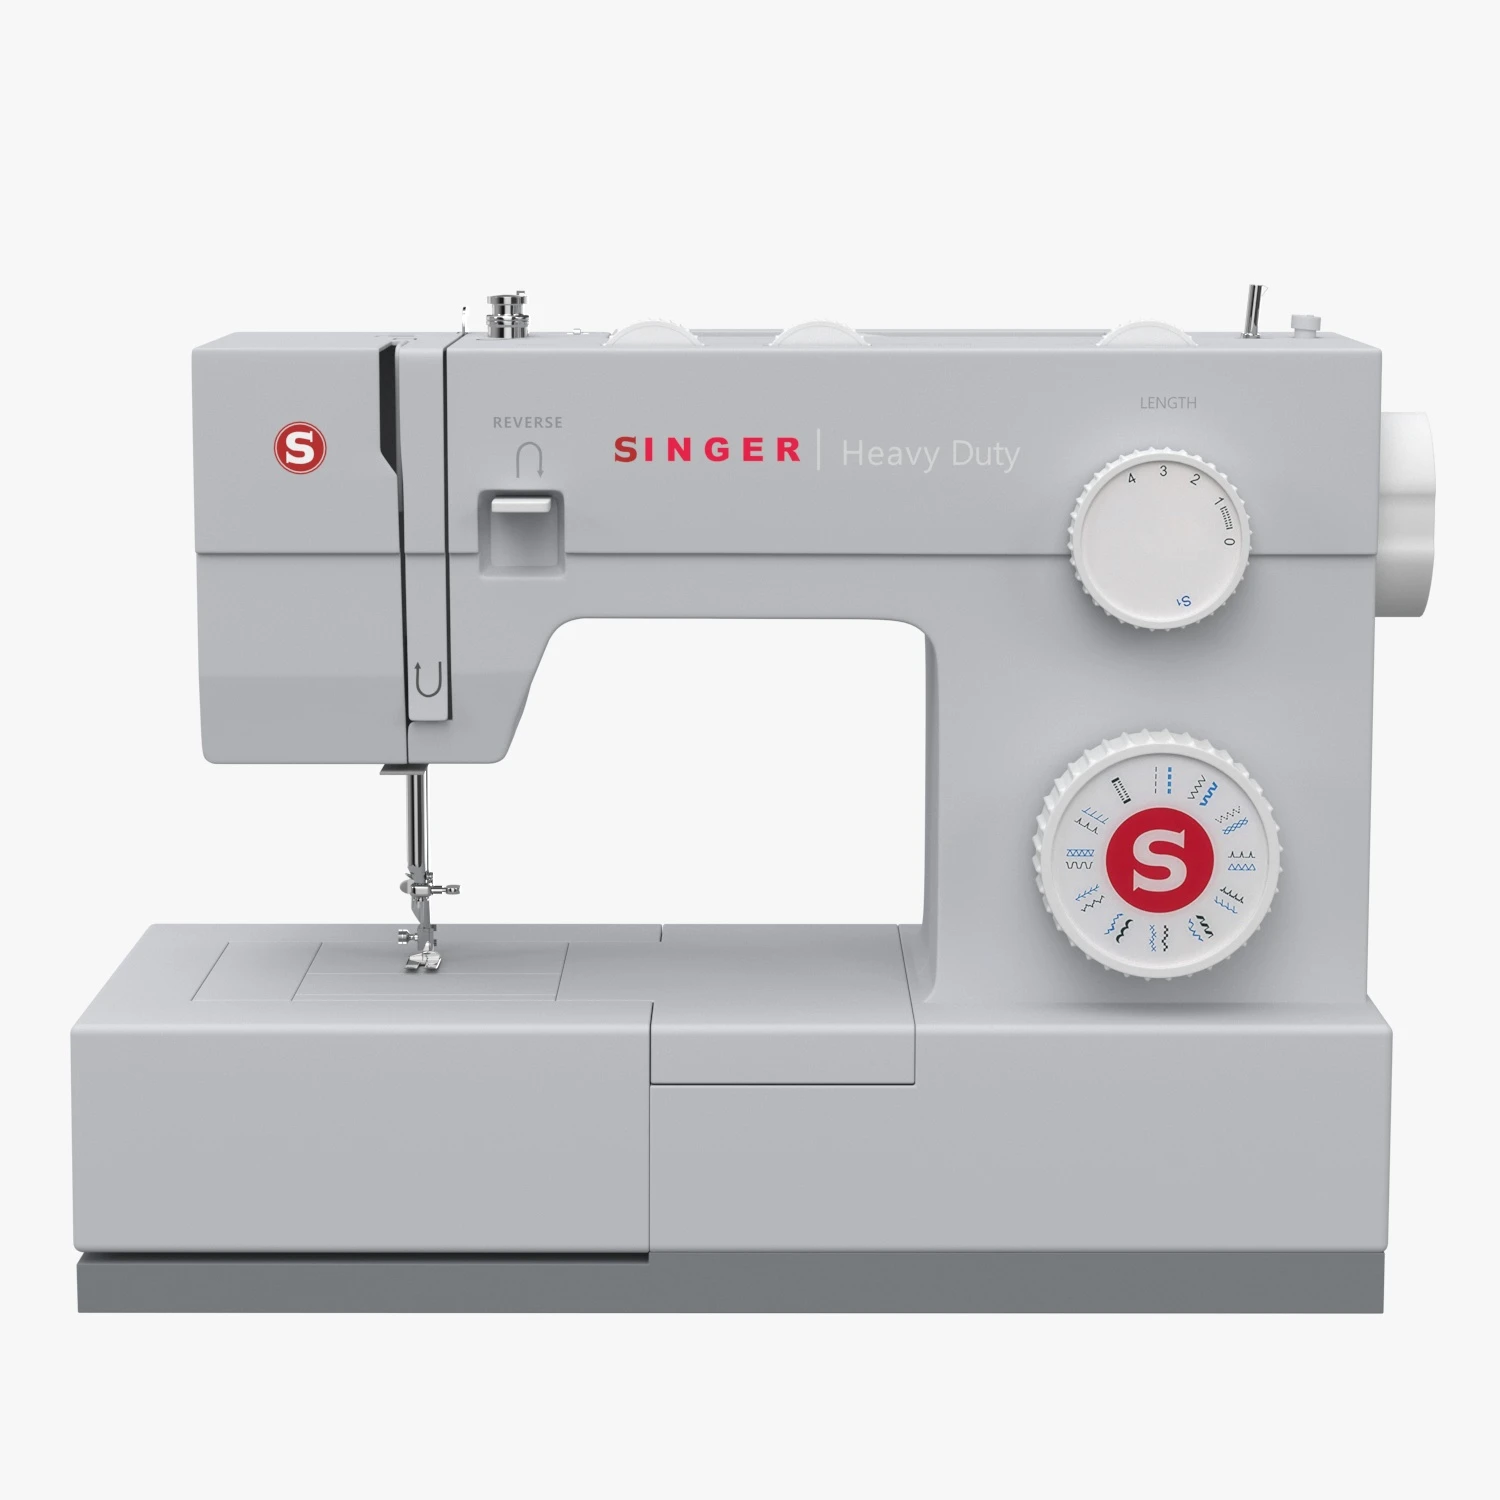 SINGER 4423 Heavy Duty Sewing Machine With Included Accessory Kit 3D Model_01